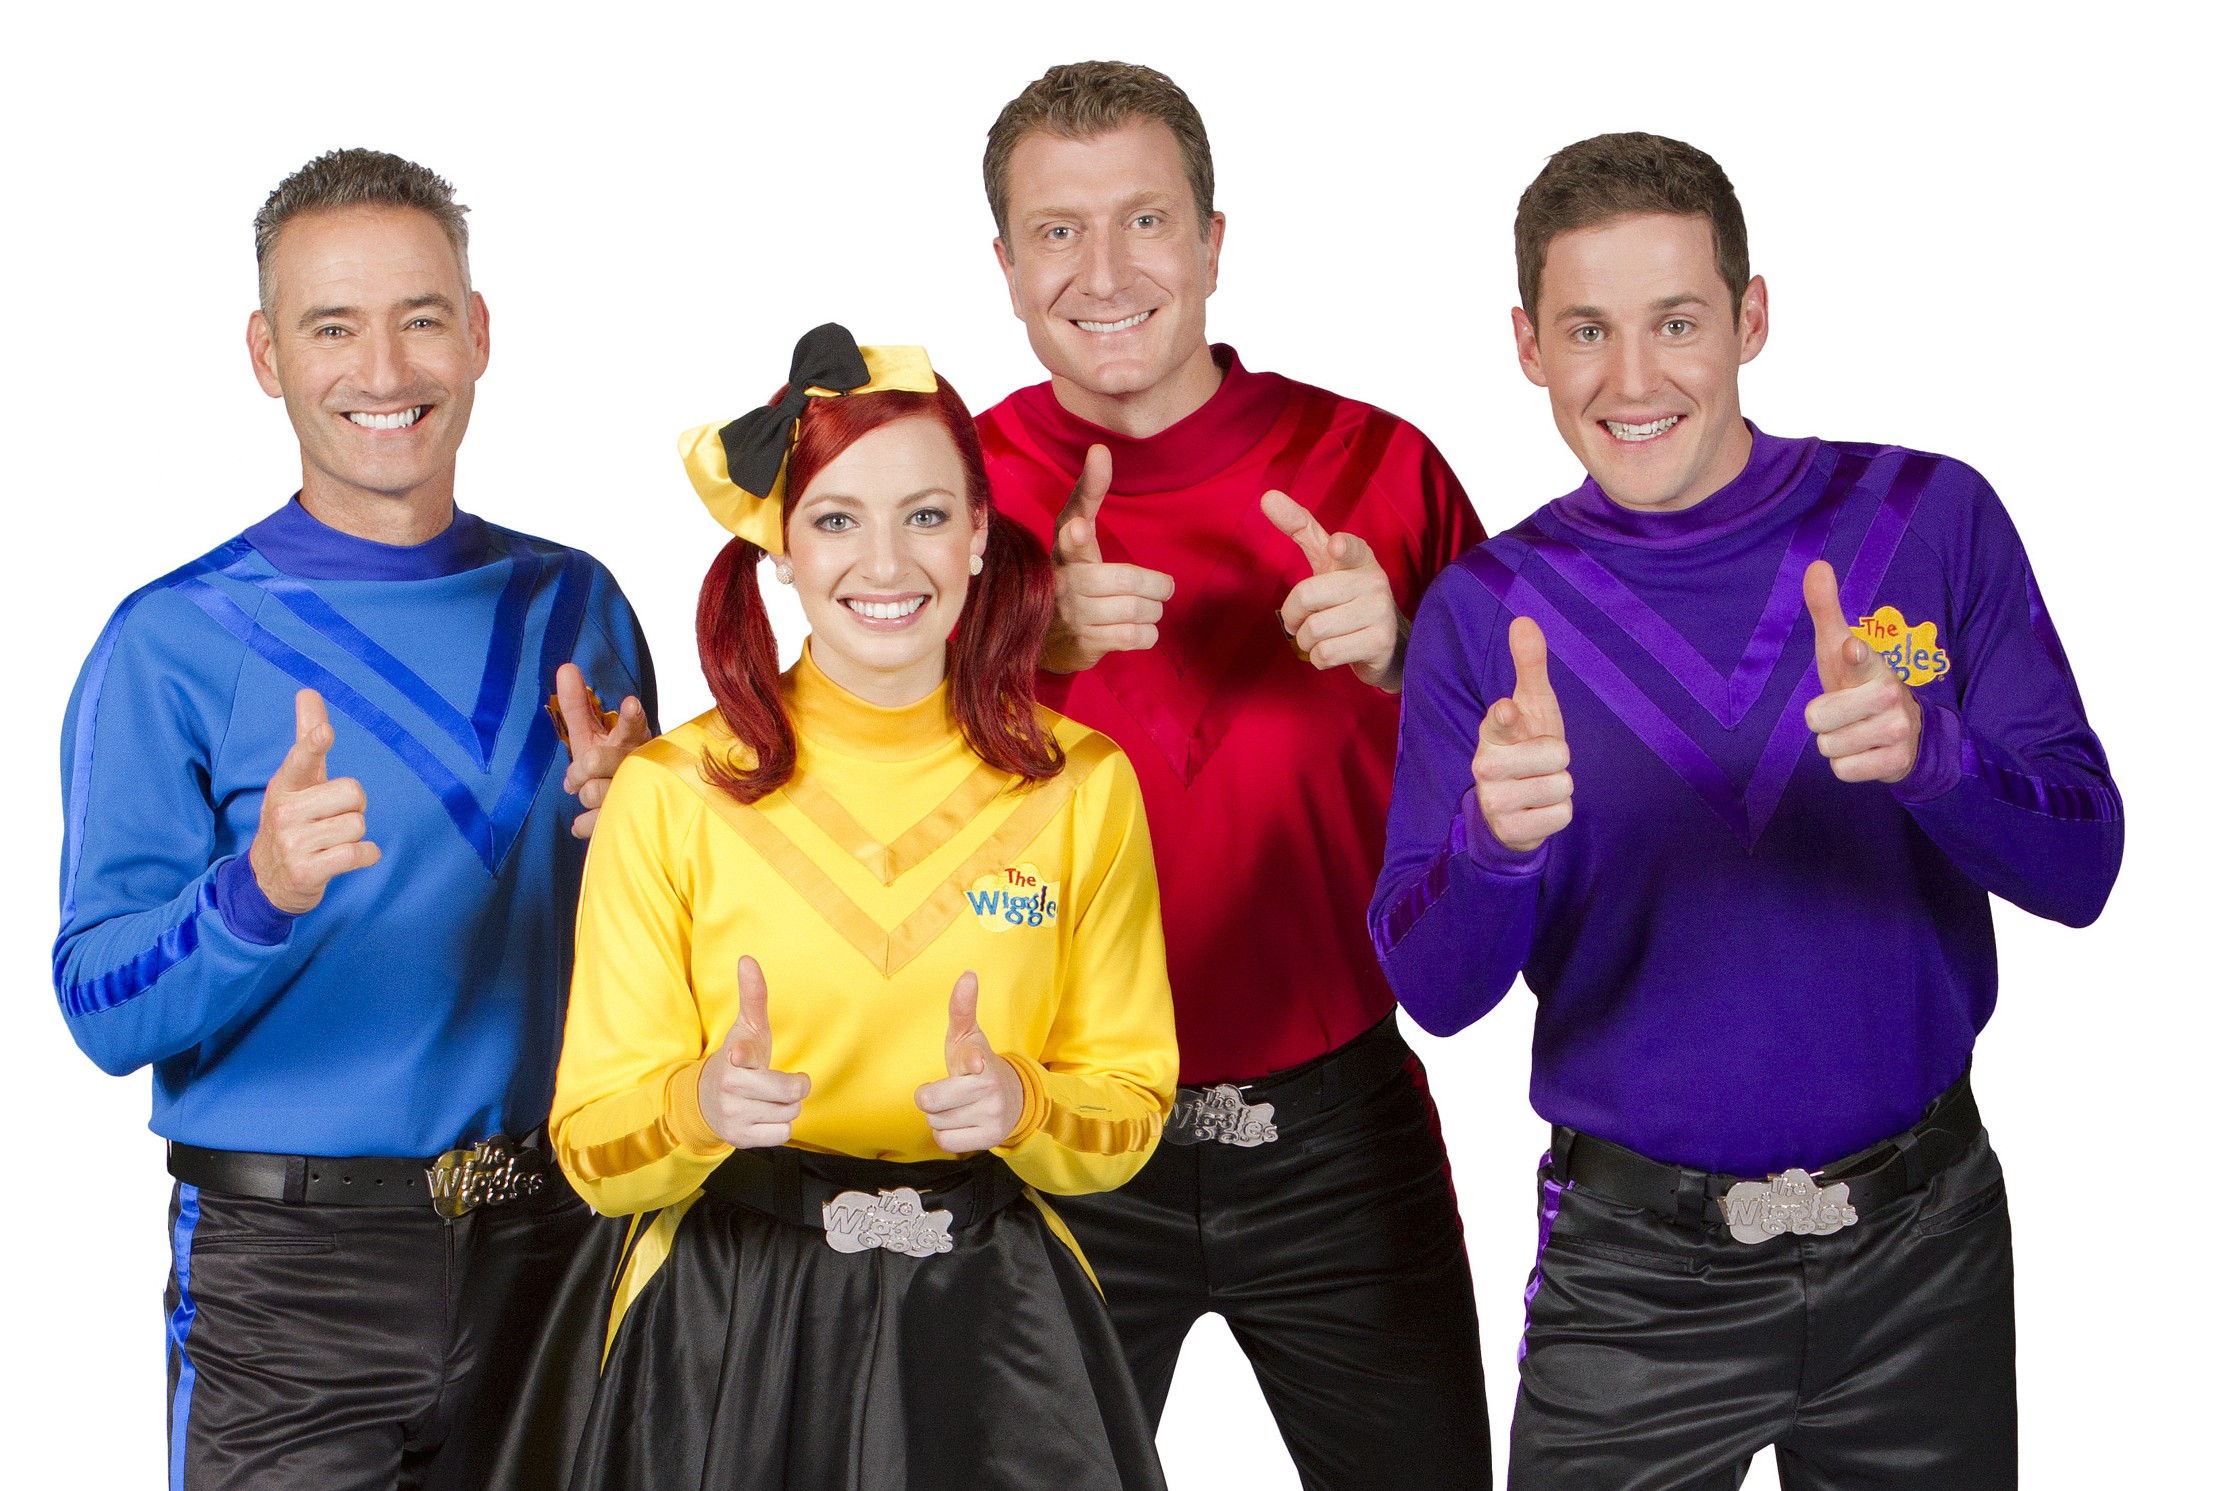 The Wiggles Ink New Deal In 20Year Relatiionship With Agency B&T